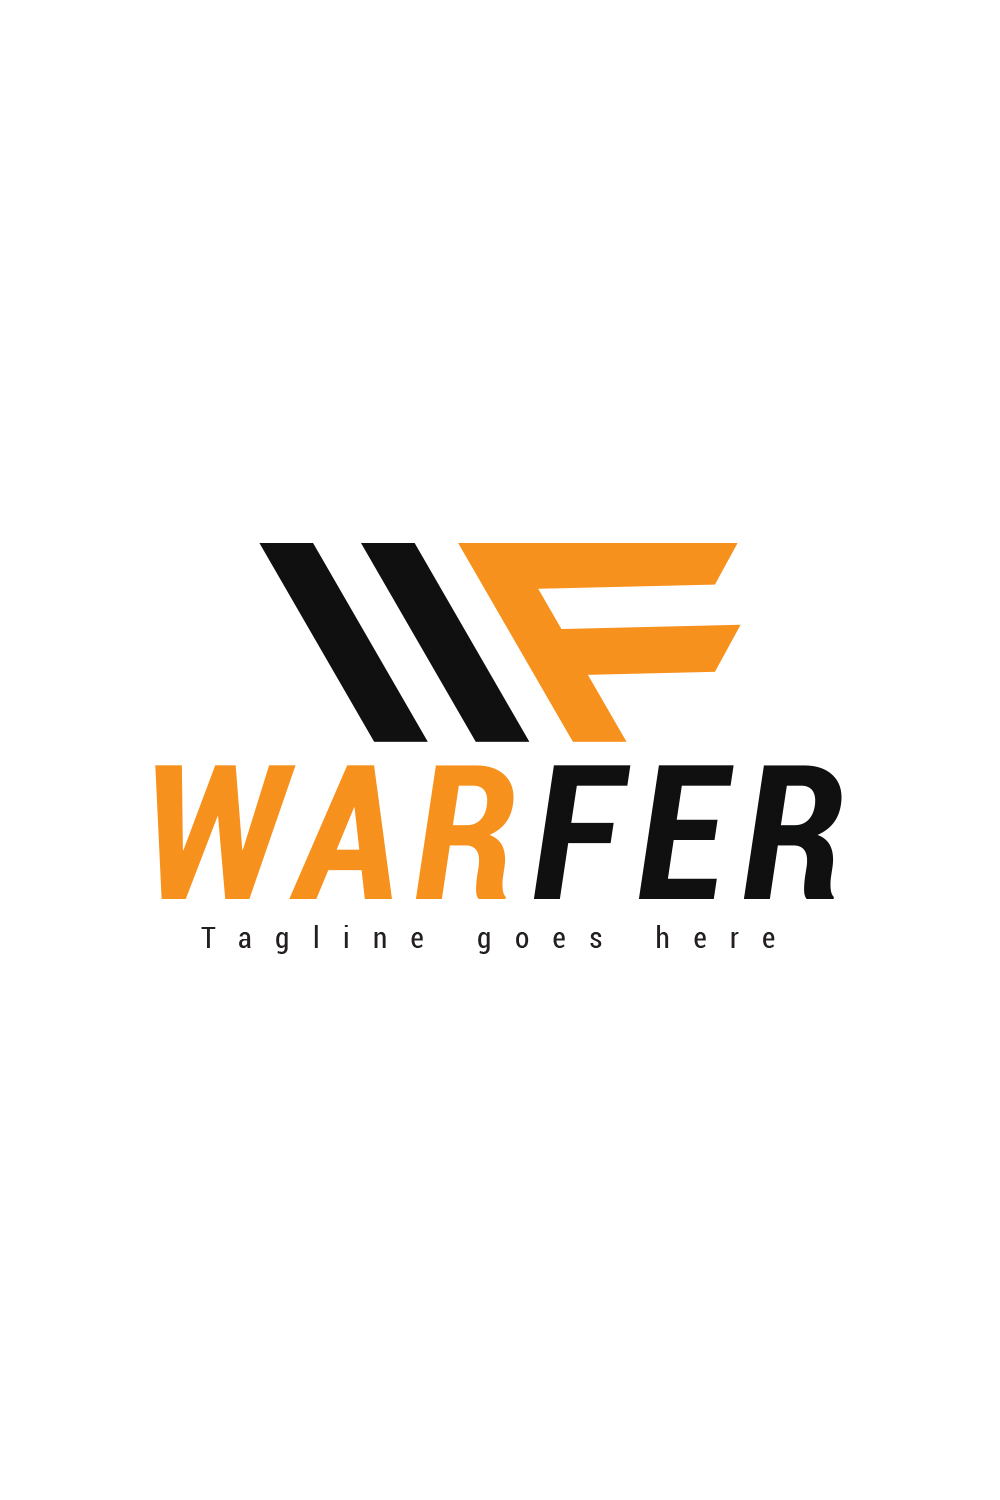 Warfer ( Letter W and F ) logo design pinterest preview image.